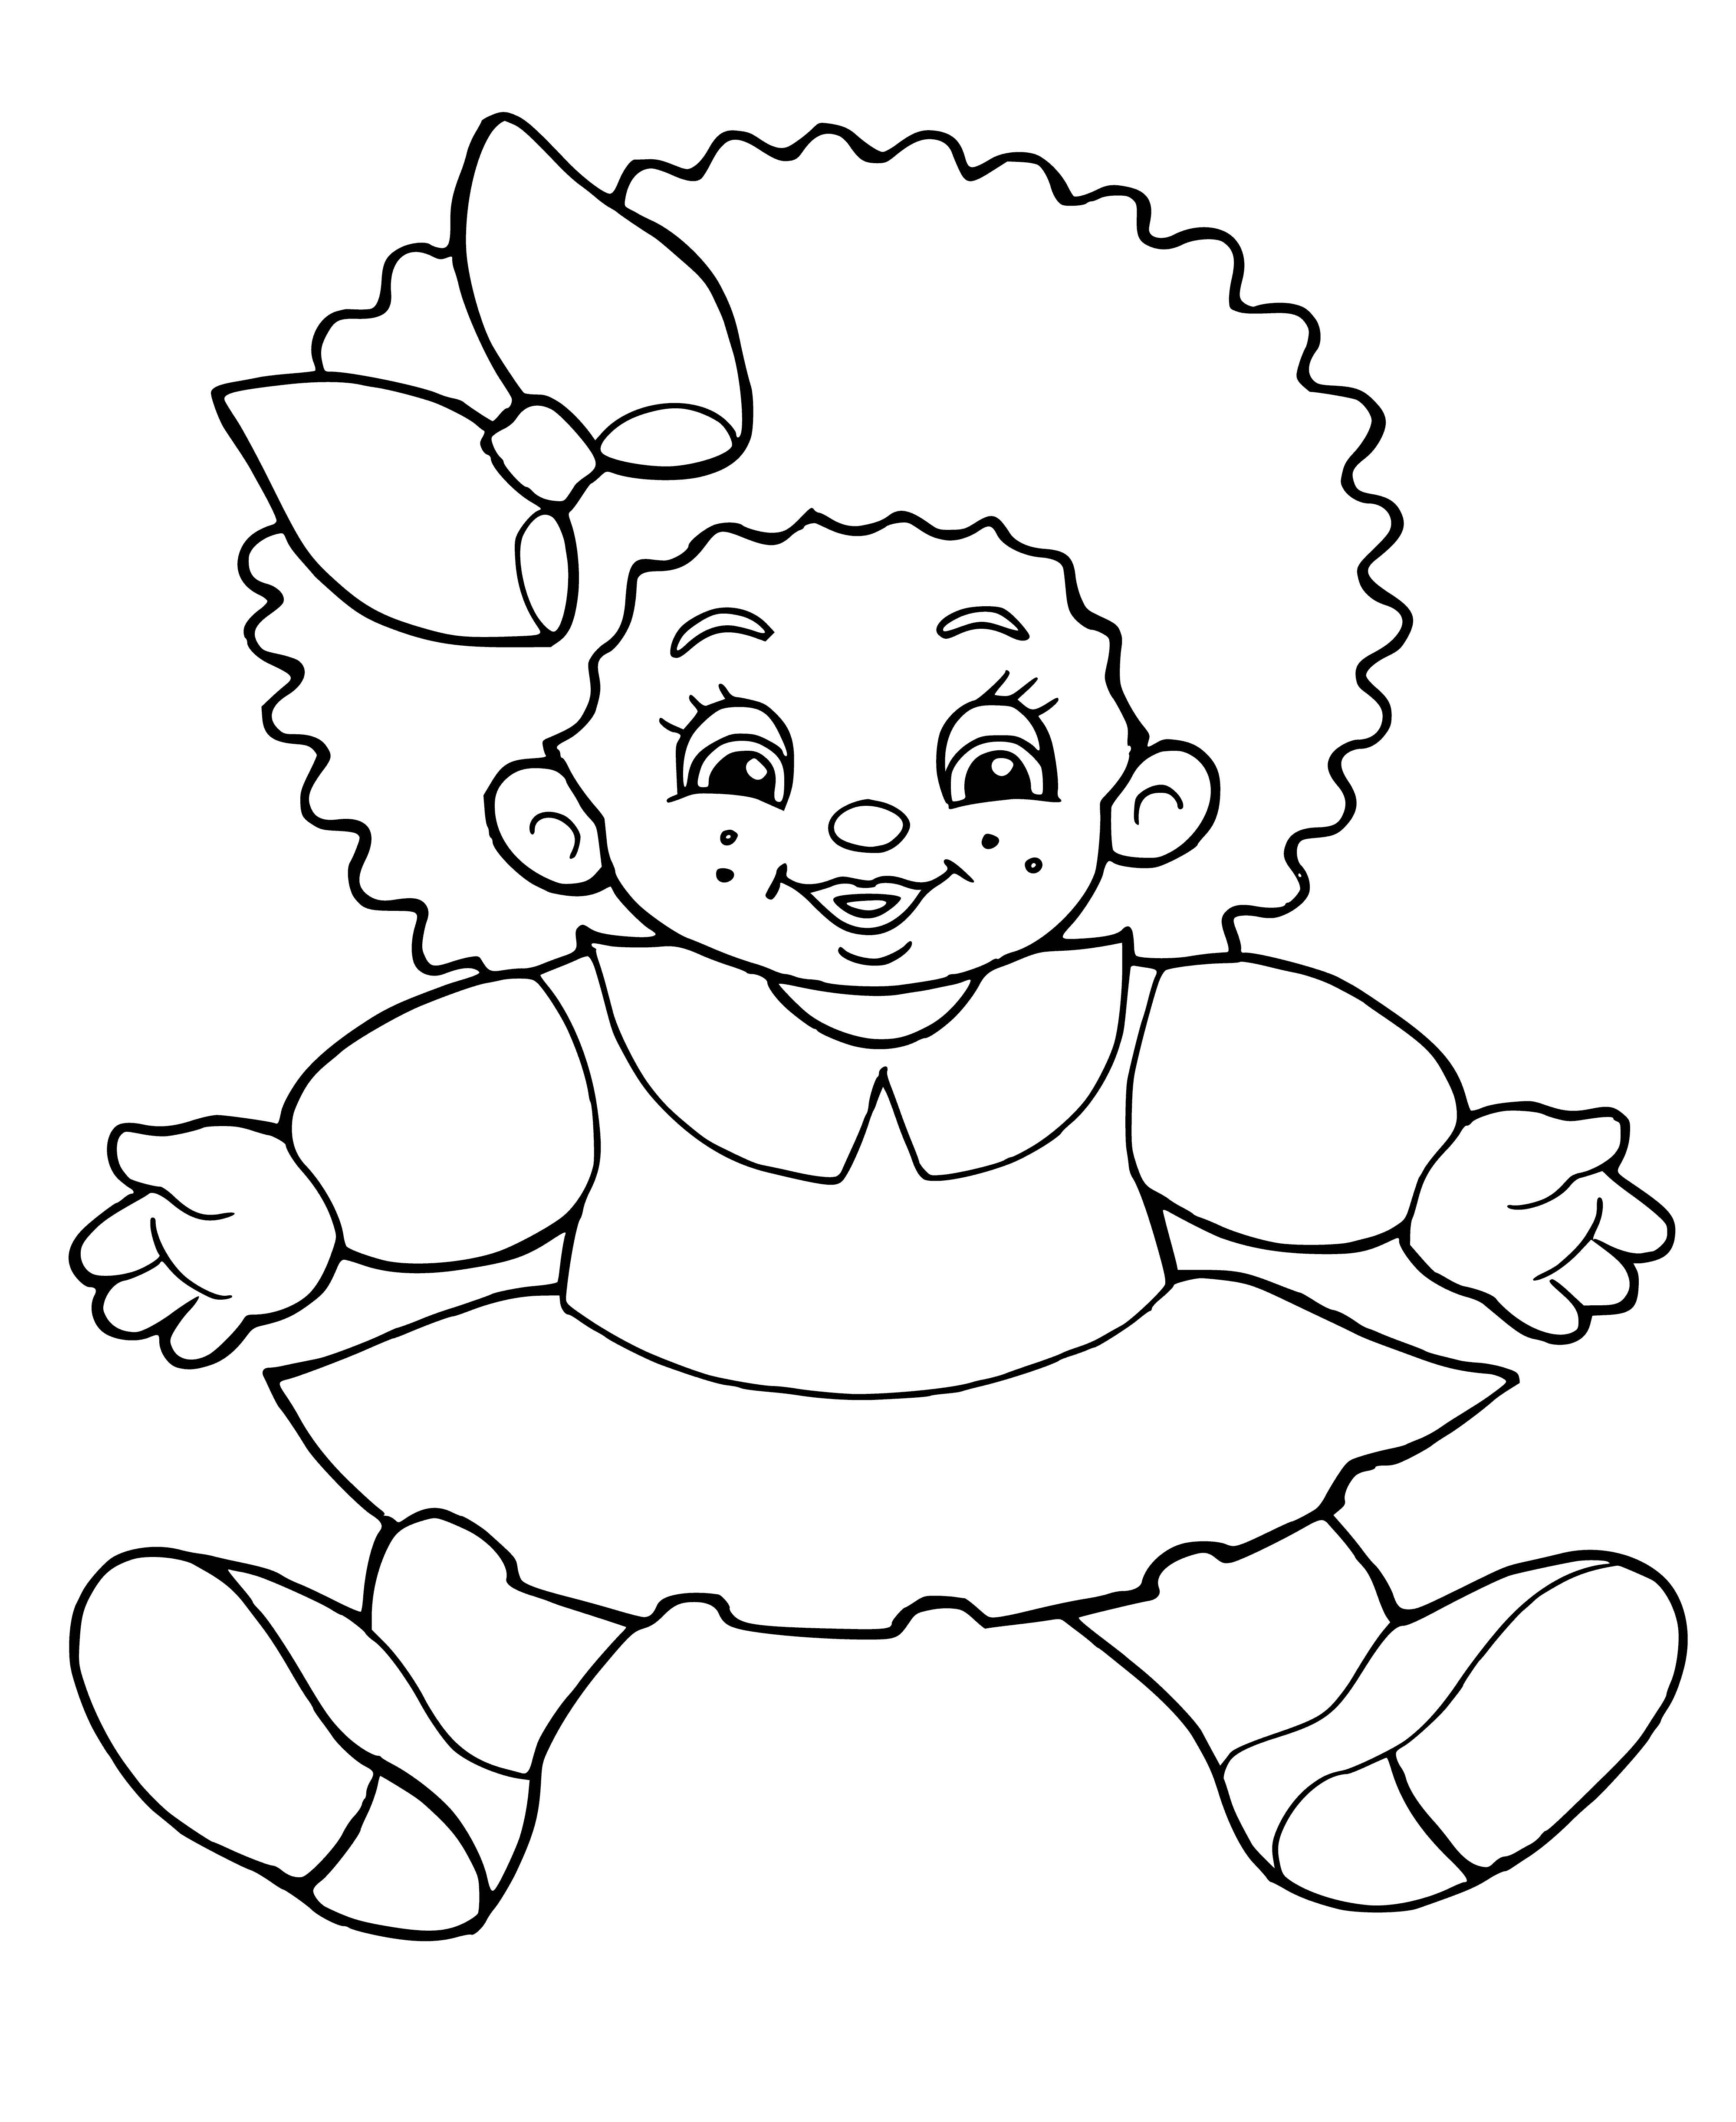 coloring page: Woman holds baby doll with soft cloth body, vinyl head, closed eyes, open mouth wearing white dress w/ pink ribbon. #BabyDoll